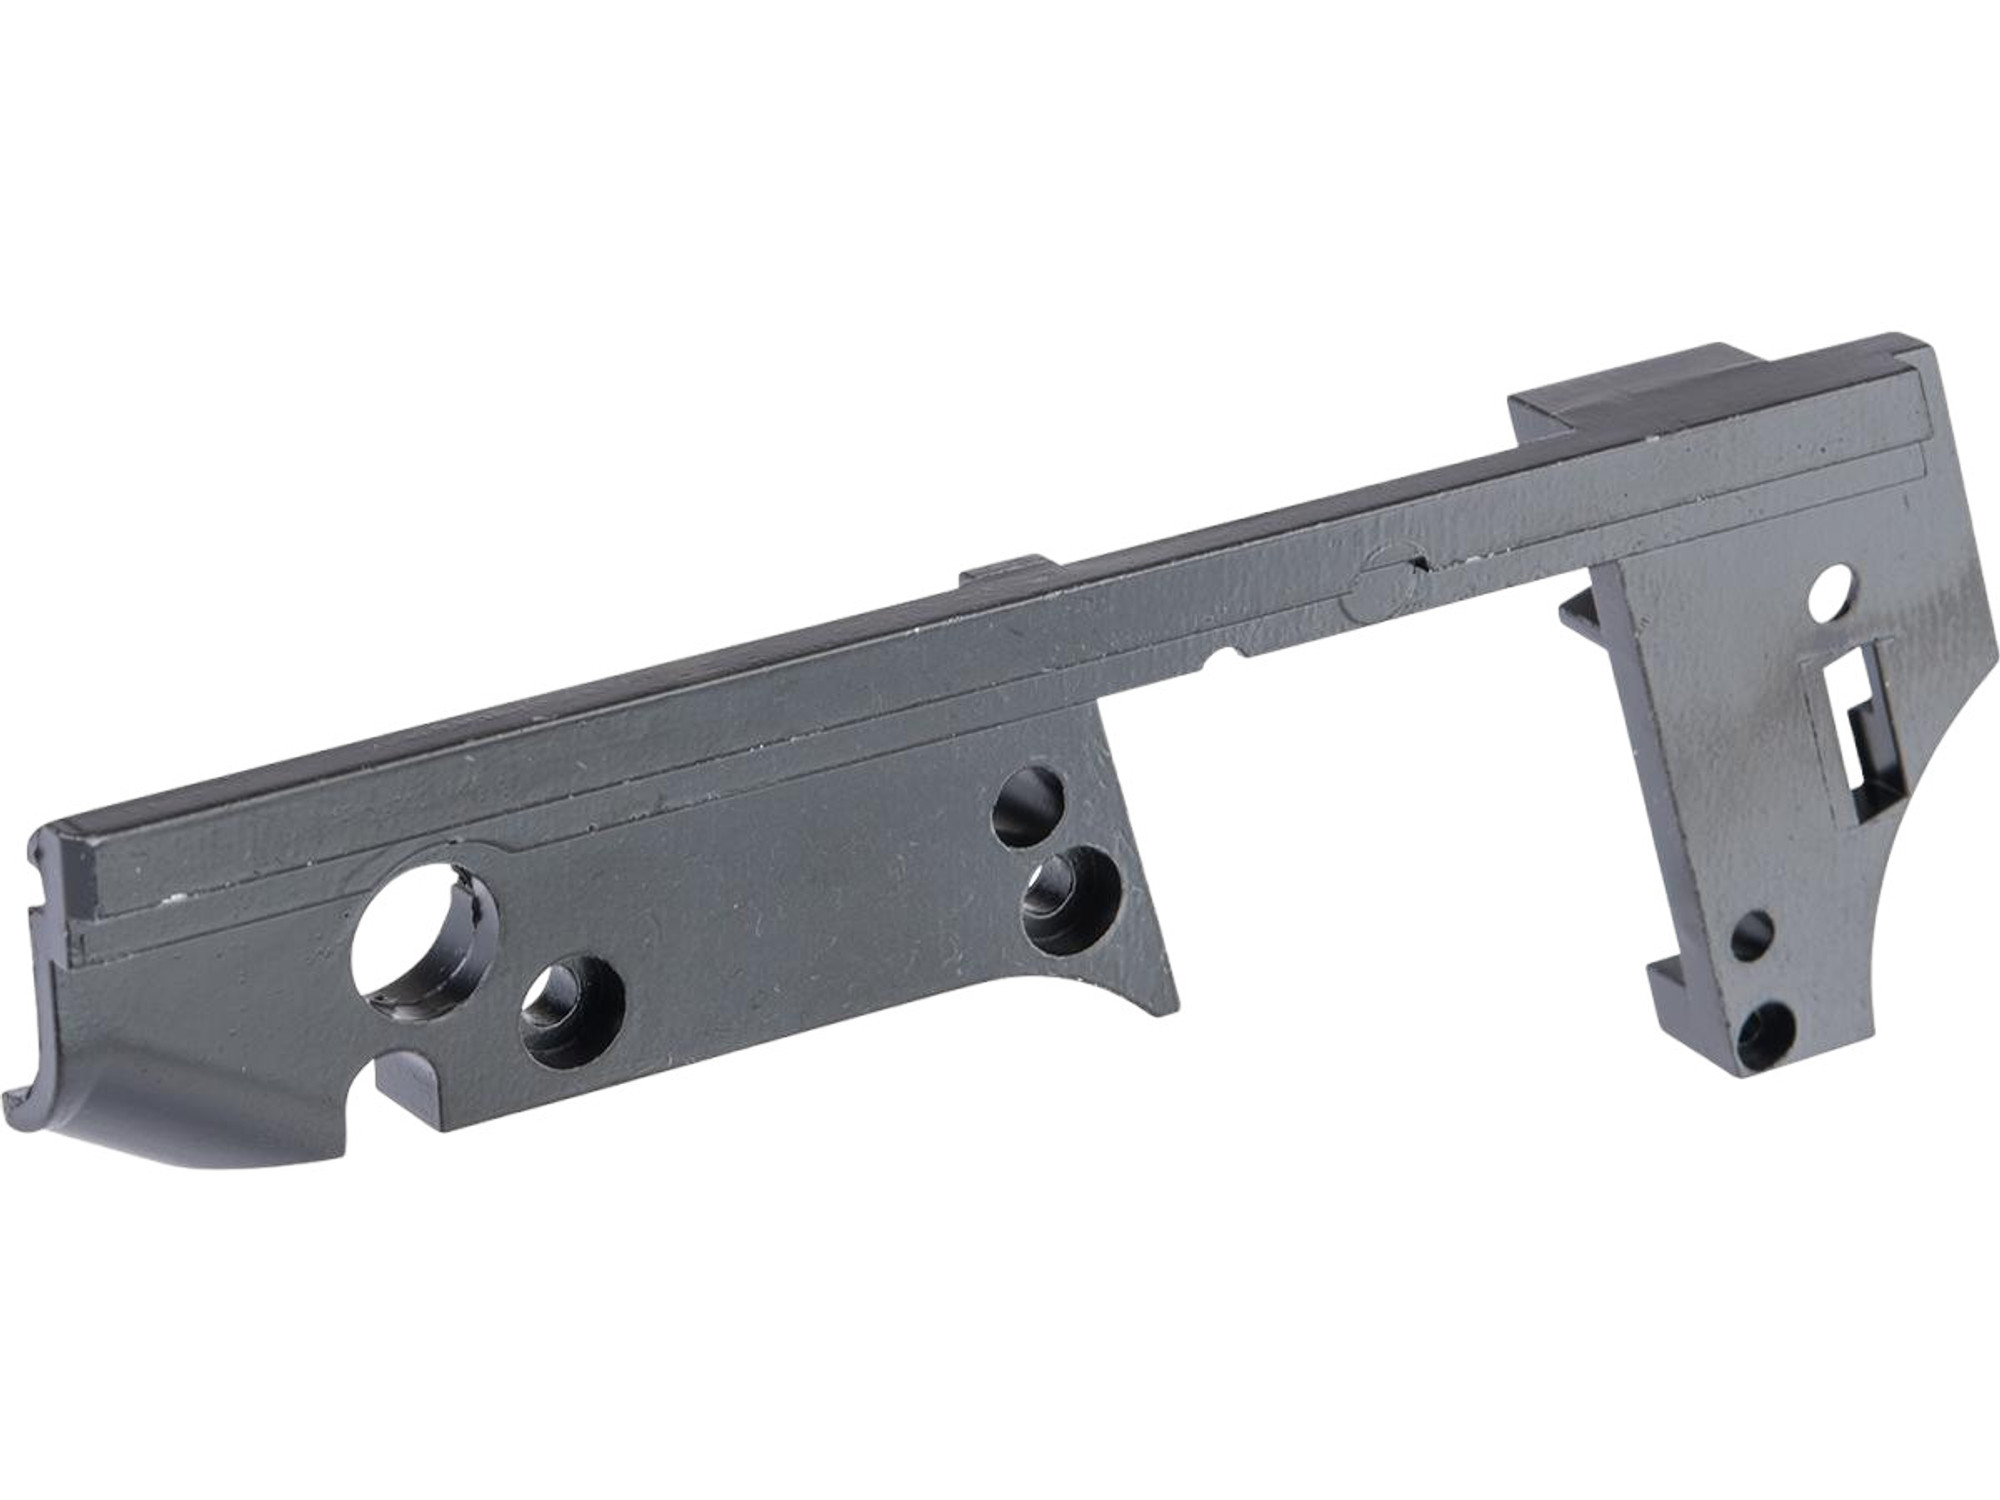 KJW Replacement Inner Chassis for KJW Government M9 Series Gas Blowback Airsoft Pistol (Model: Left Side)